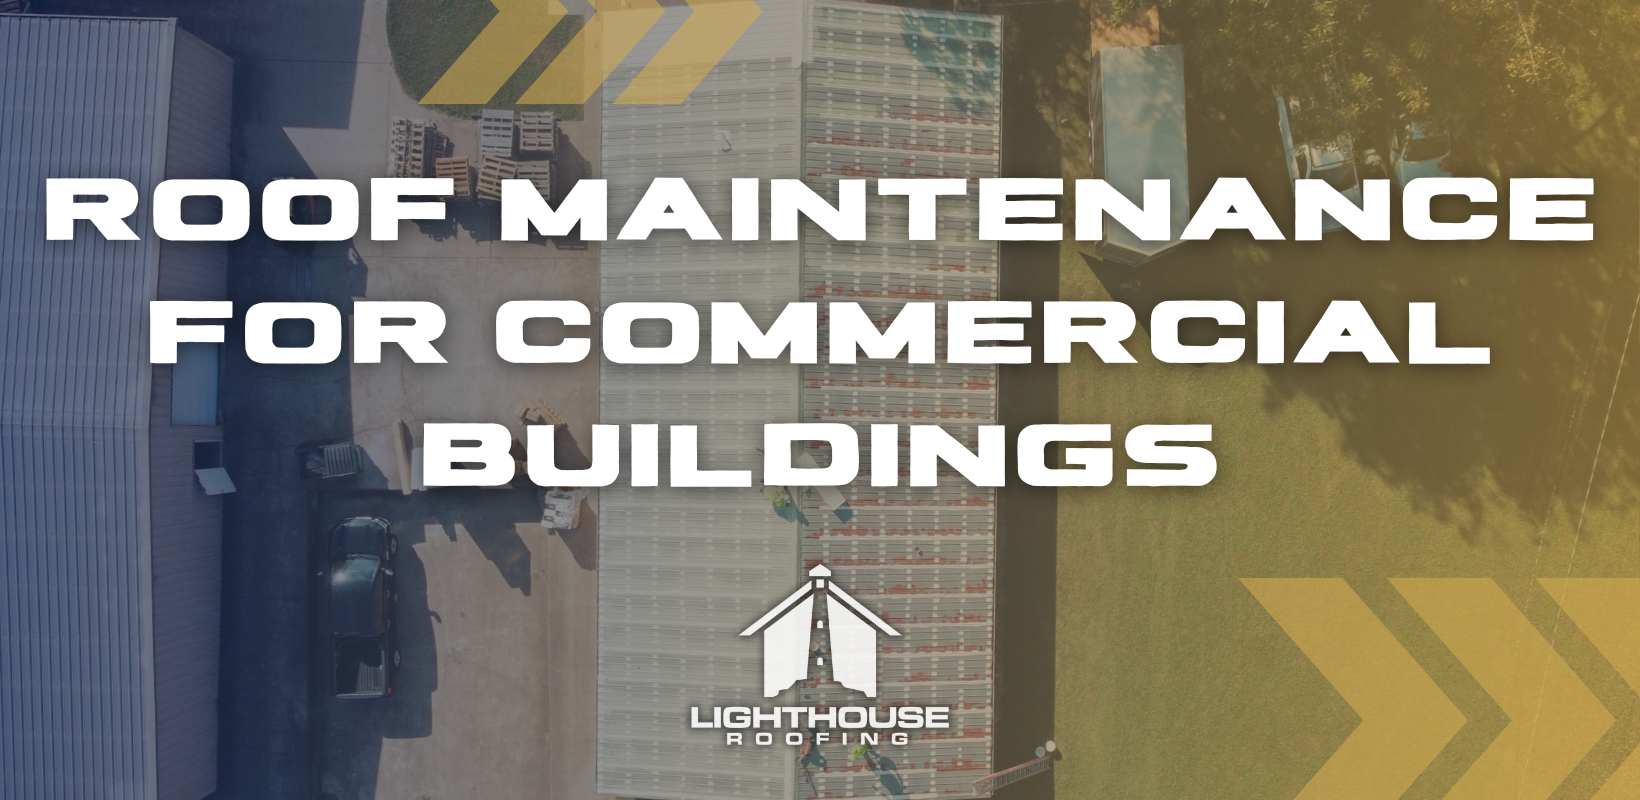 Roofing Maintenance for Commercial Buildings